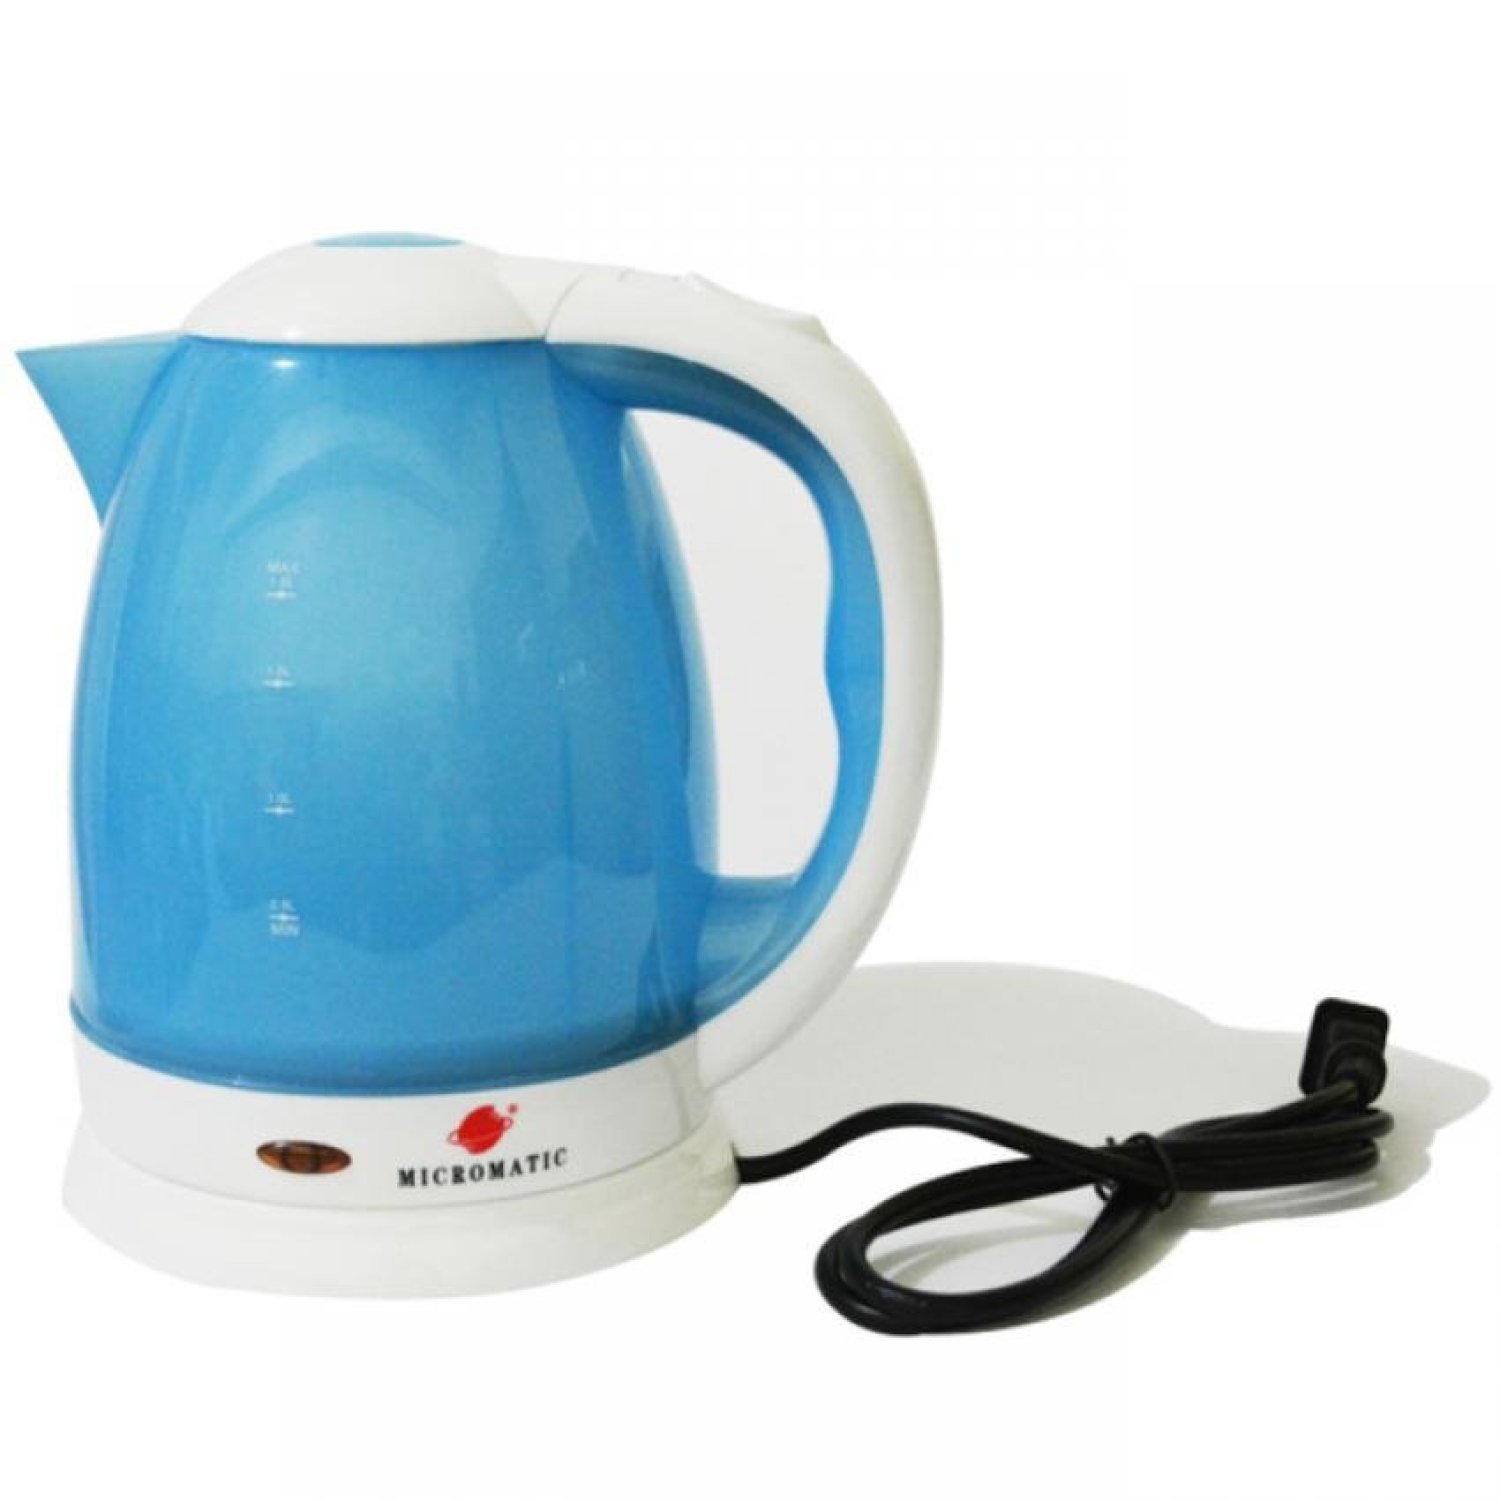 micromatic electric kettle price